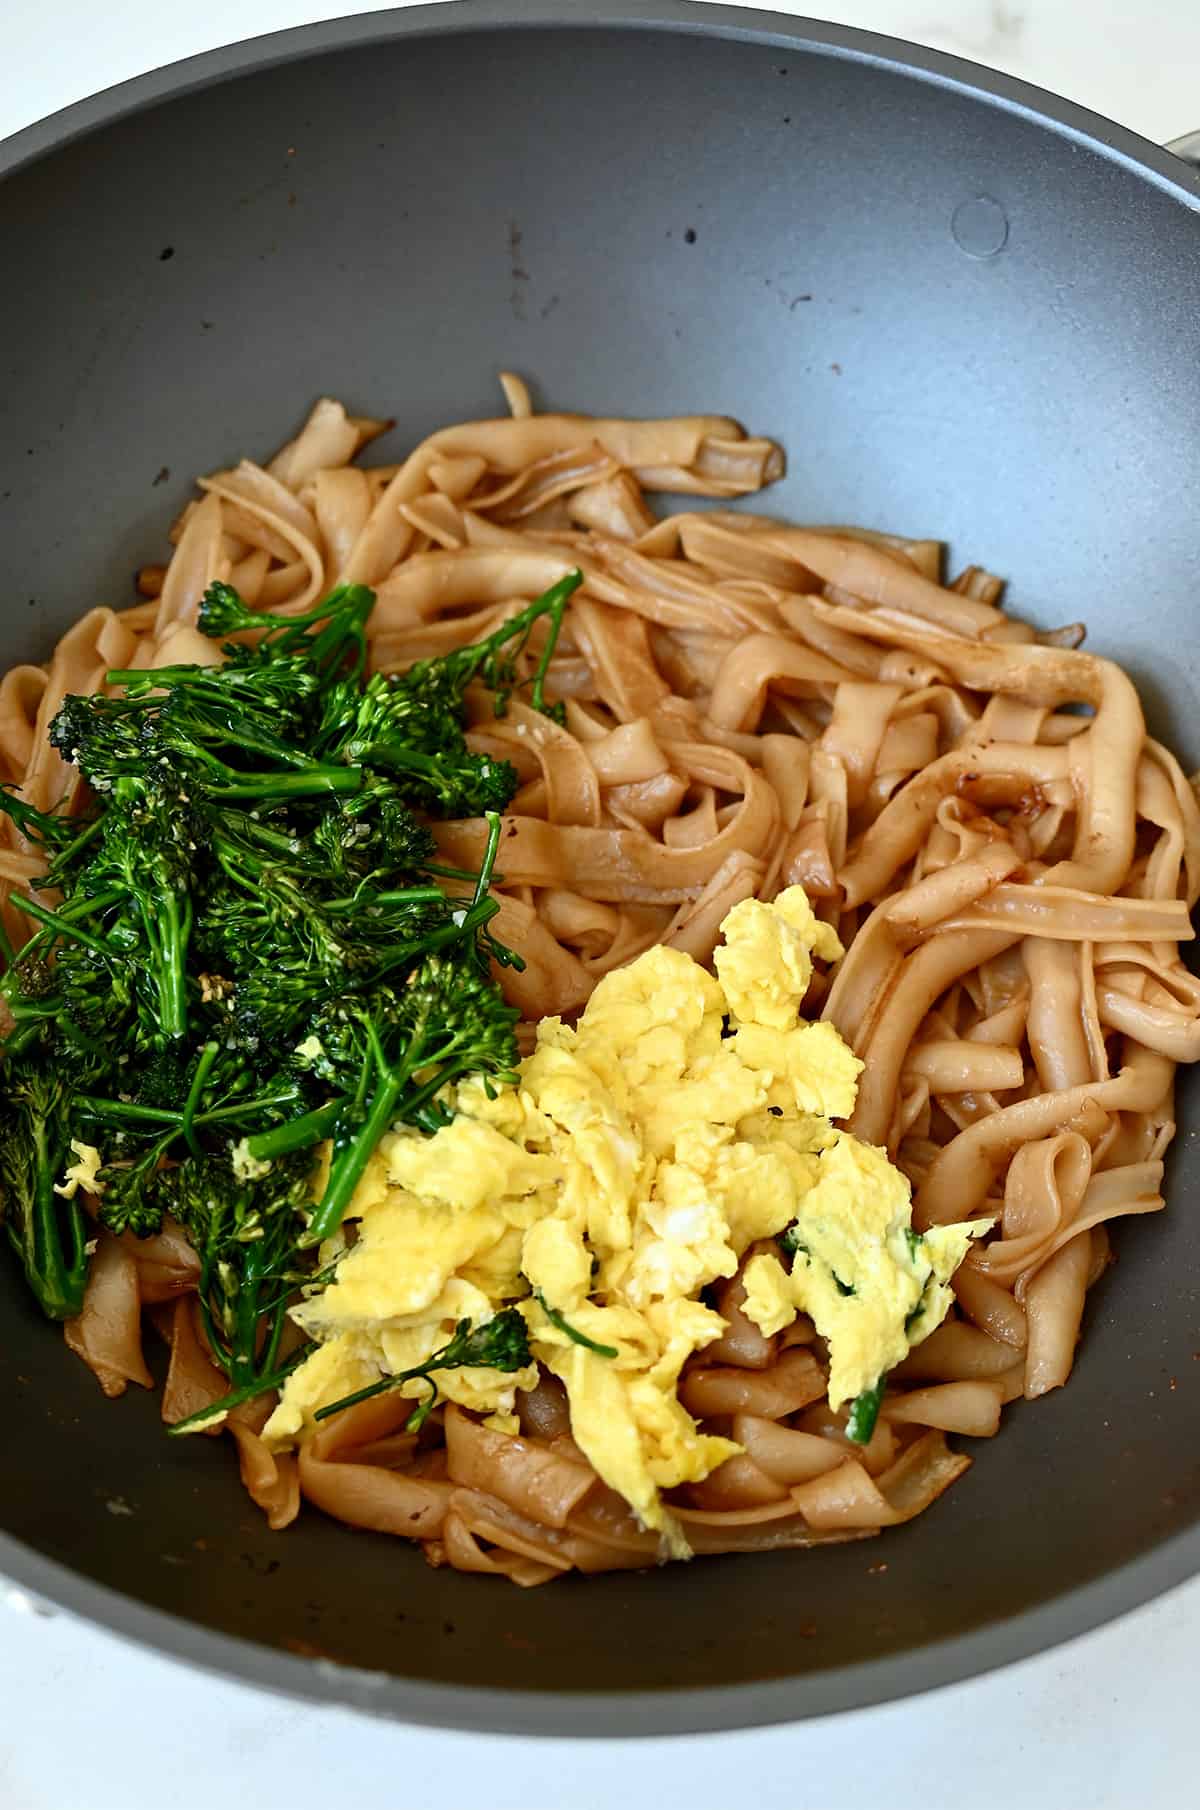 Broccolini, scrambled eggs and caramelized rice noodles in a wok.